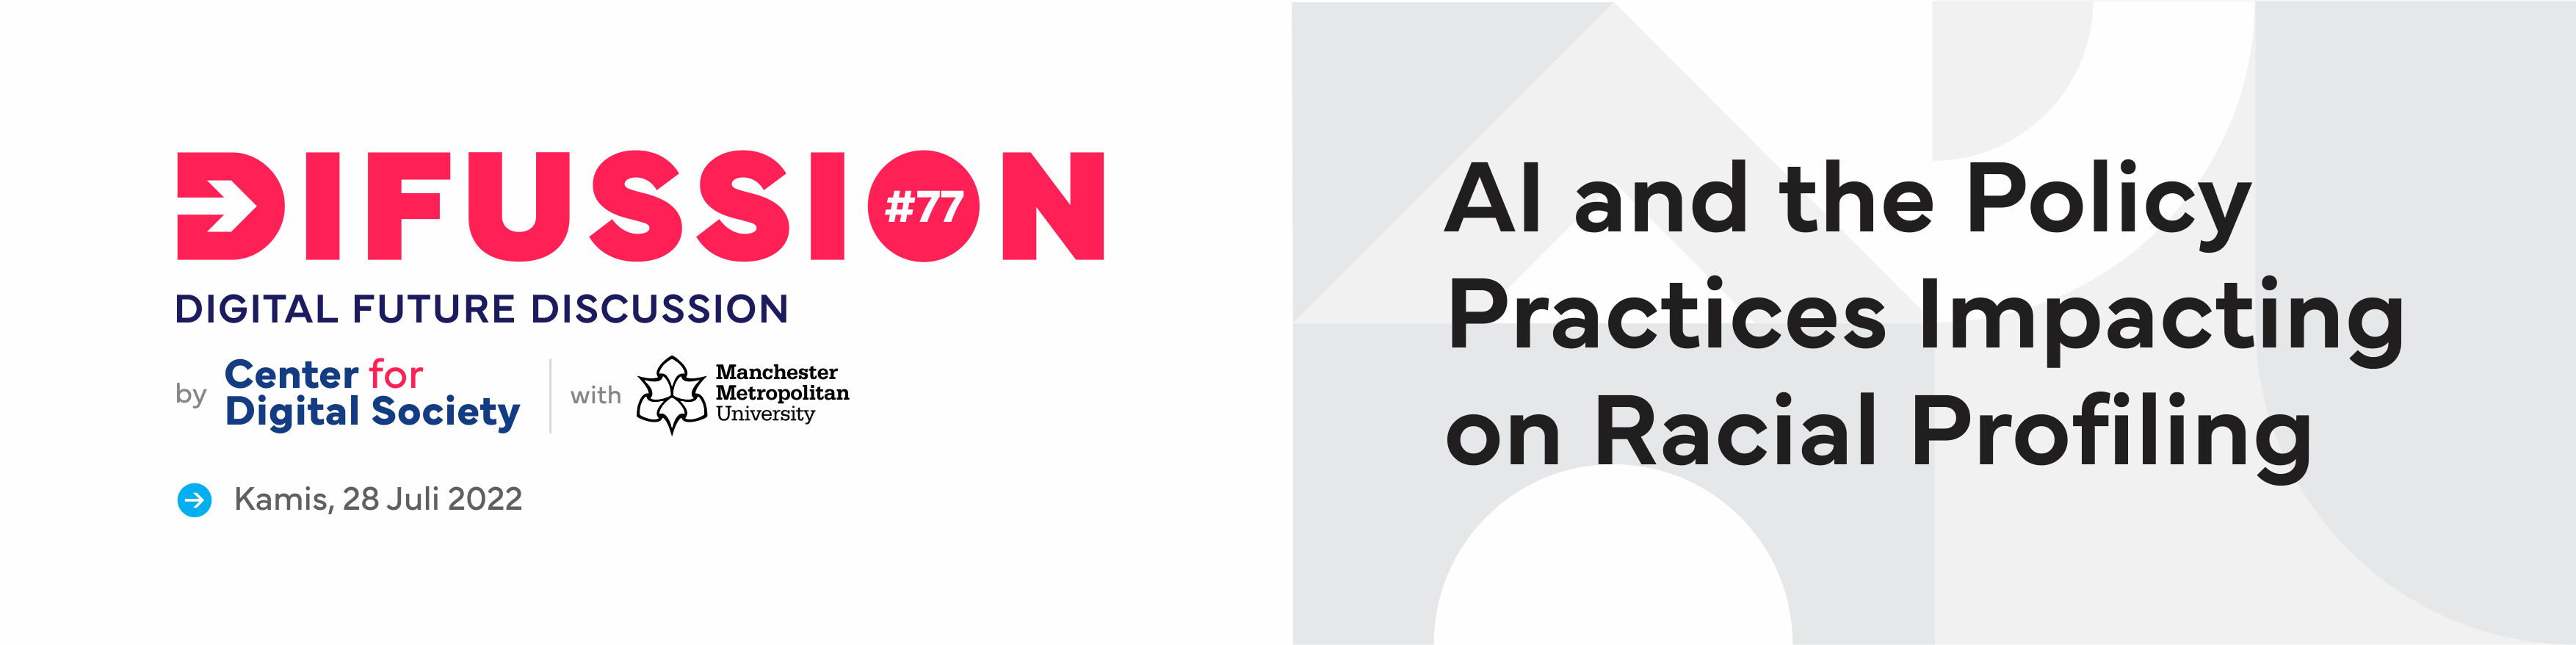 [PRESS RELEASE] AI and The Policy Practices Impacting On Racial Profiling | Difussion #77